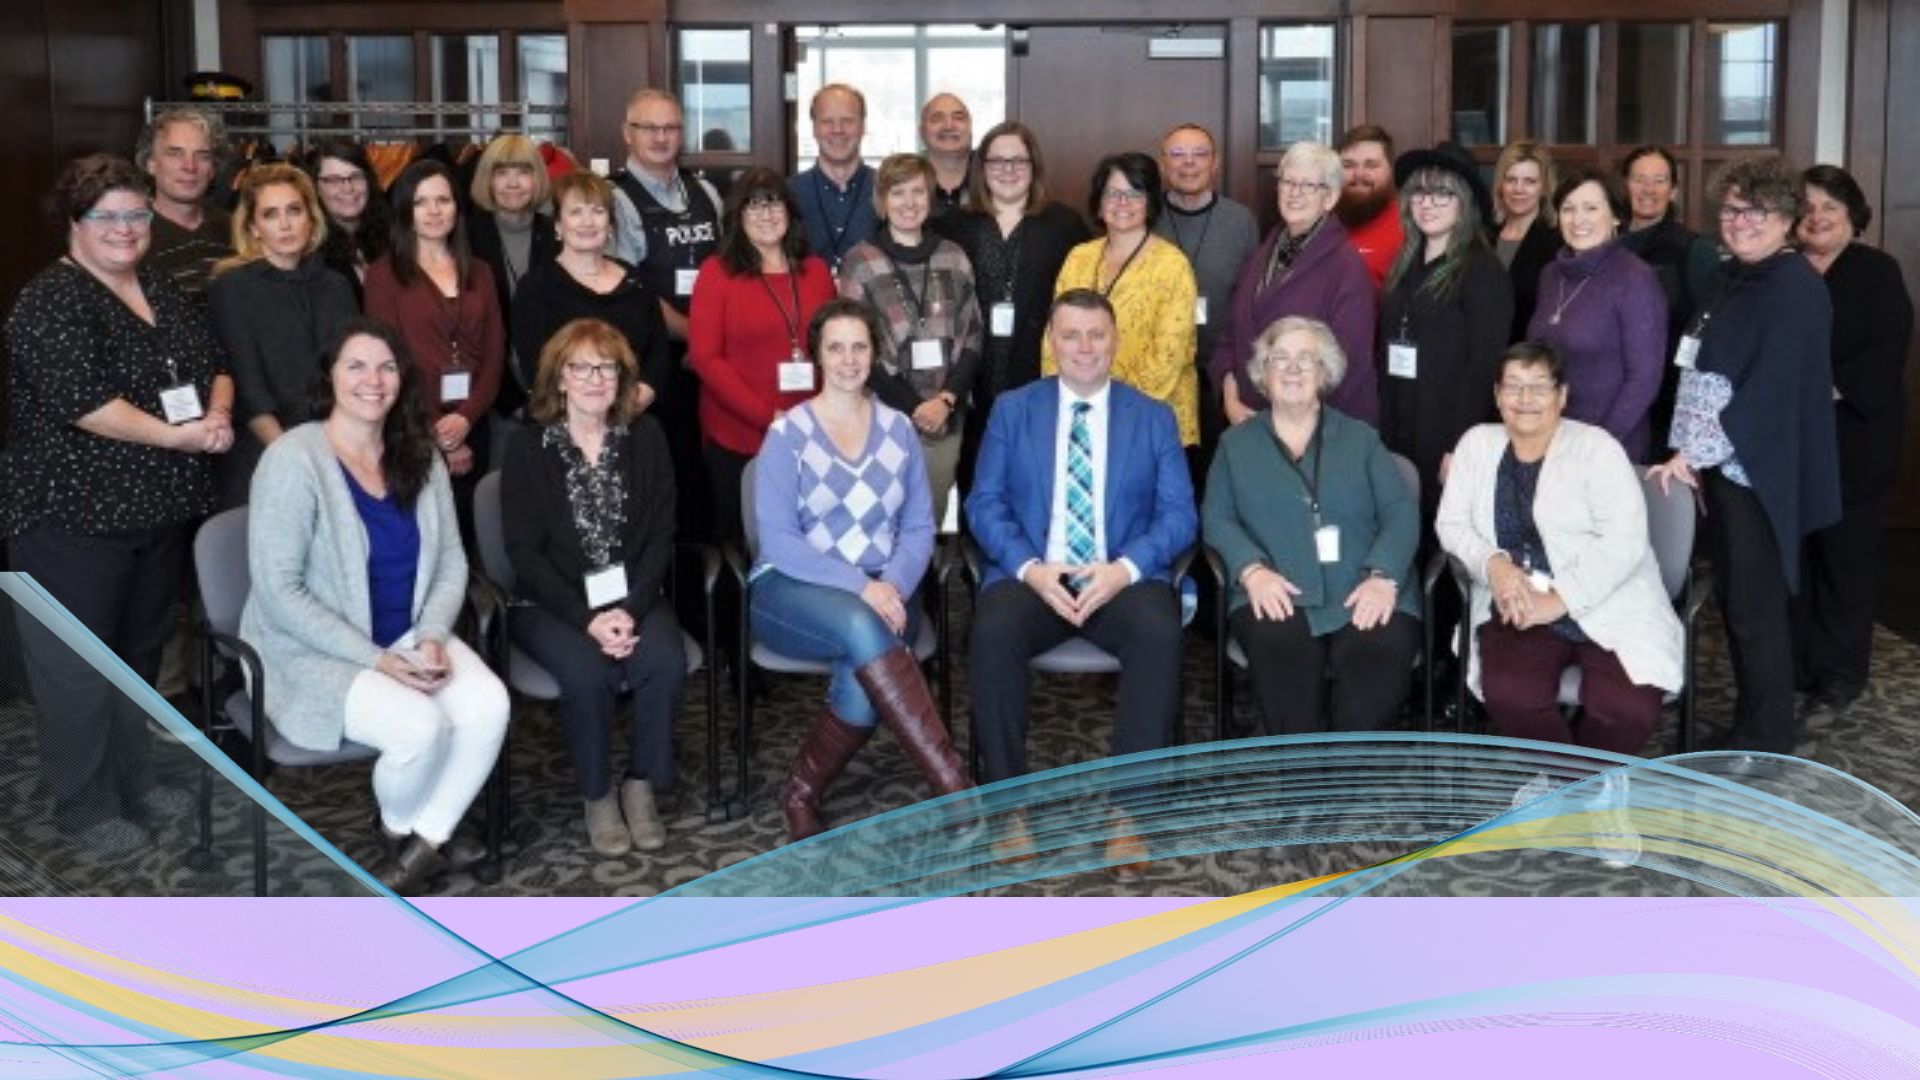 Group image of Premier's Action Committee on Family Violence Prevention 2019